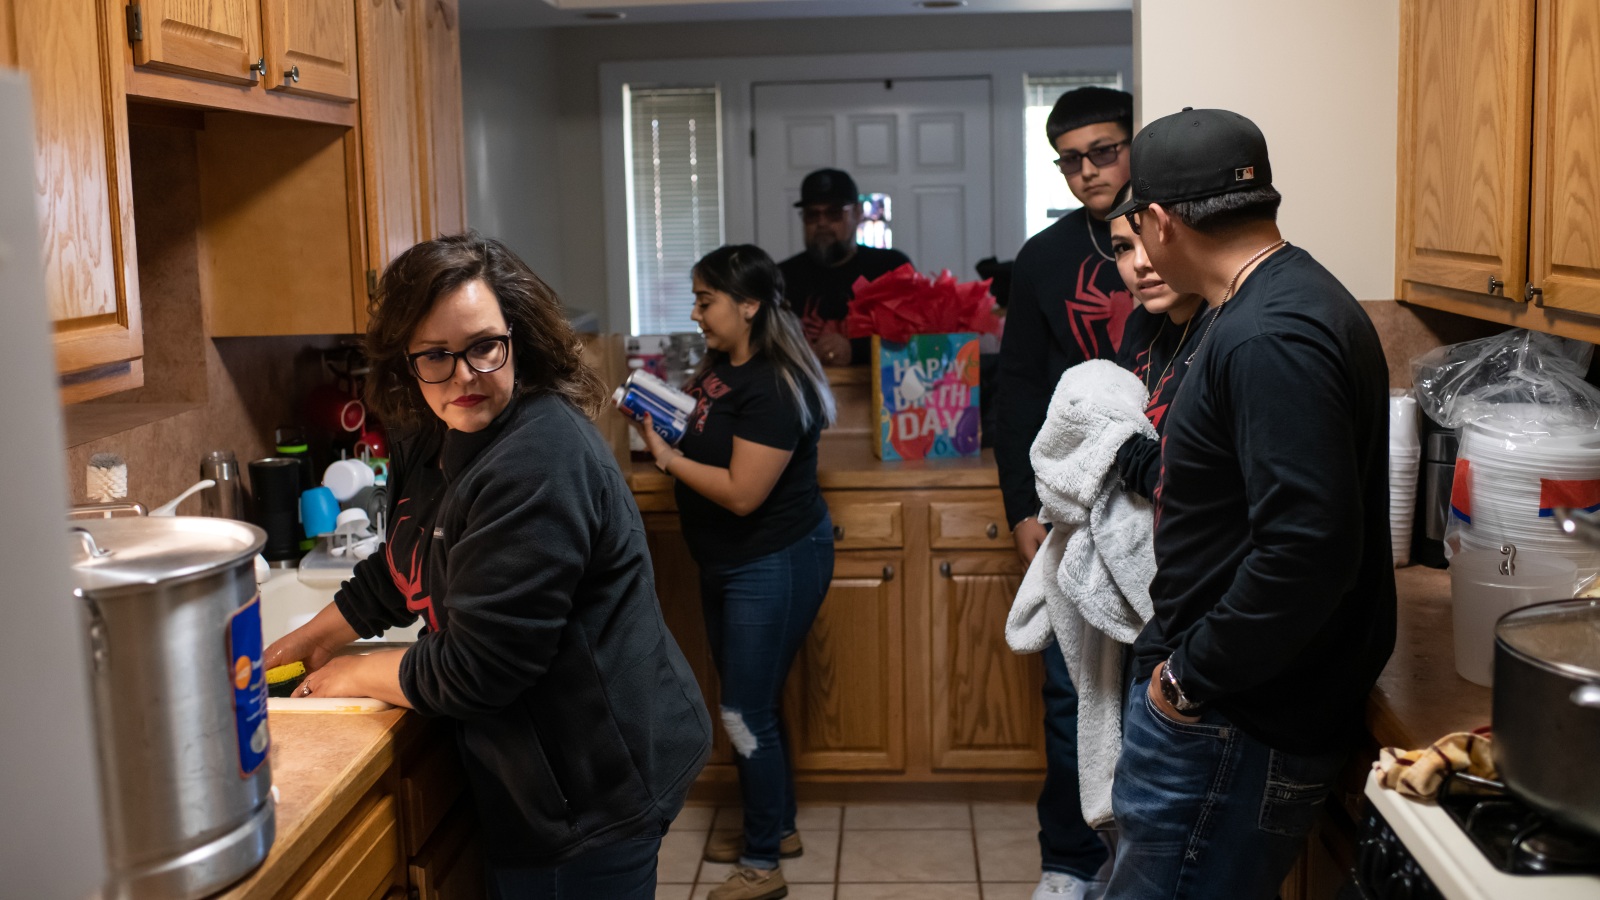 a group of people stand in a small kitchen